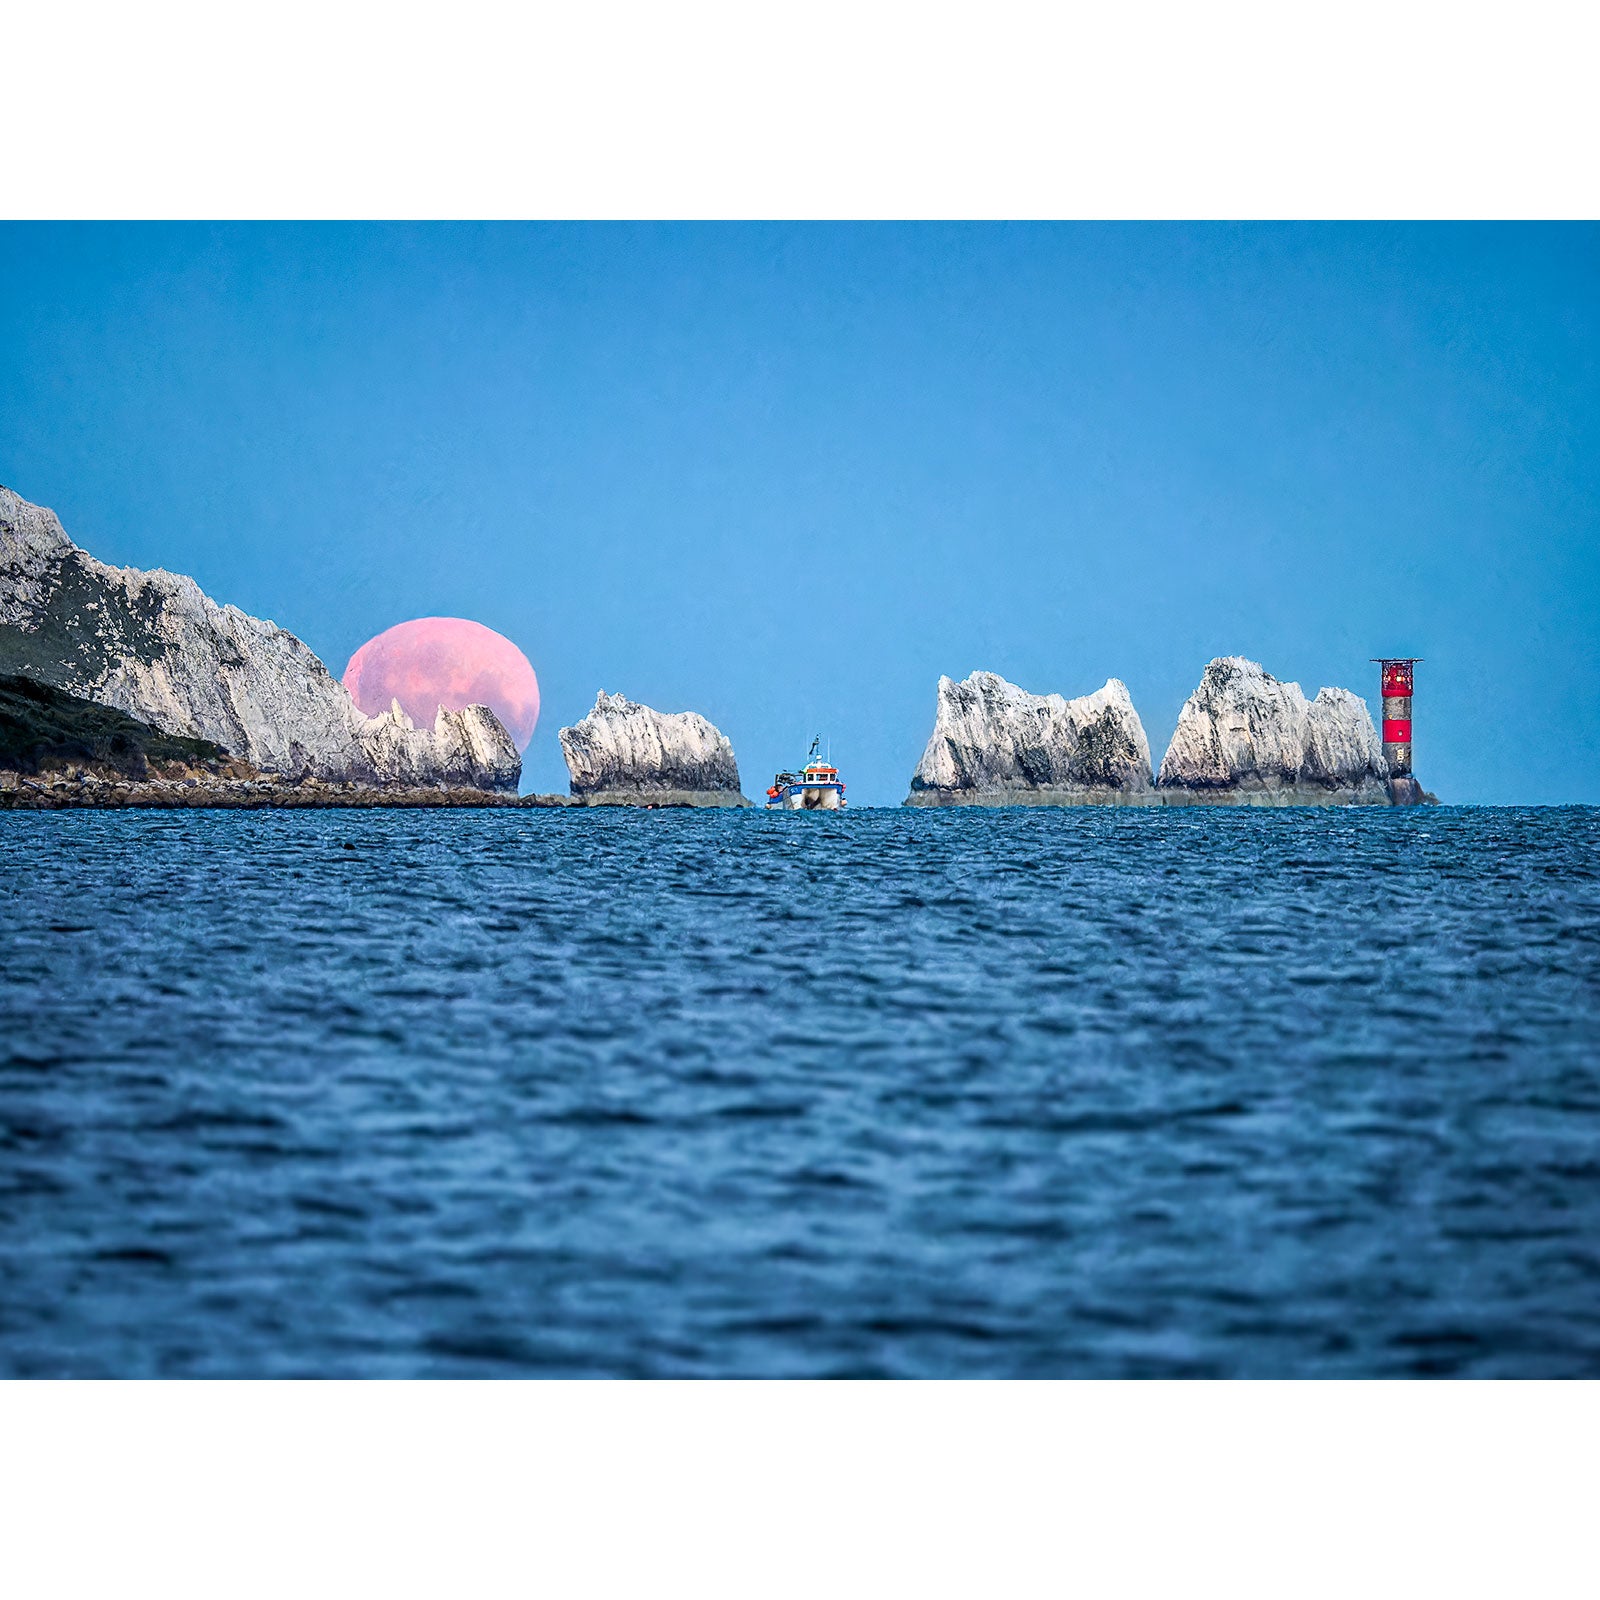 A Moonset over The Needles rising behind a lighthouse and rocky cliffs on the Isle of Wight, with a boat in the foreground. - Available Light Photography